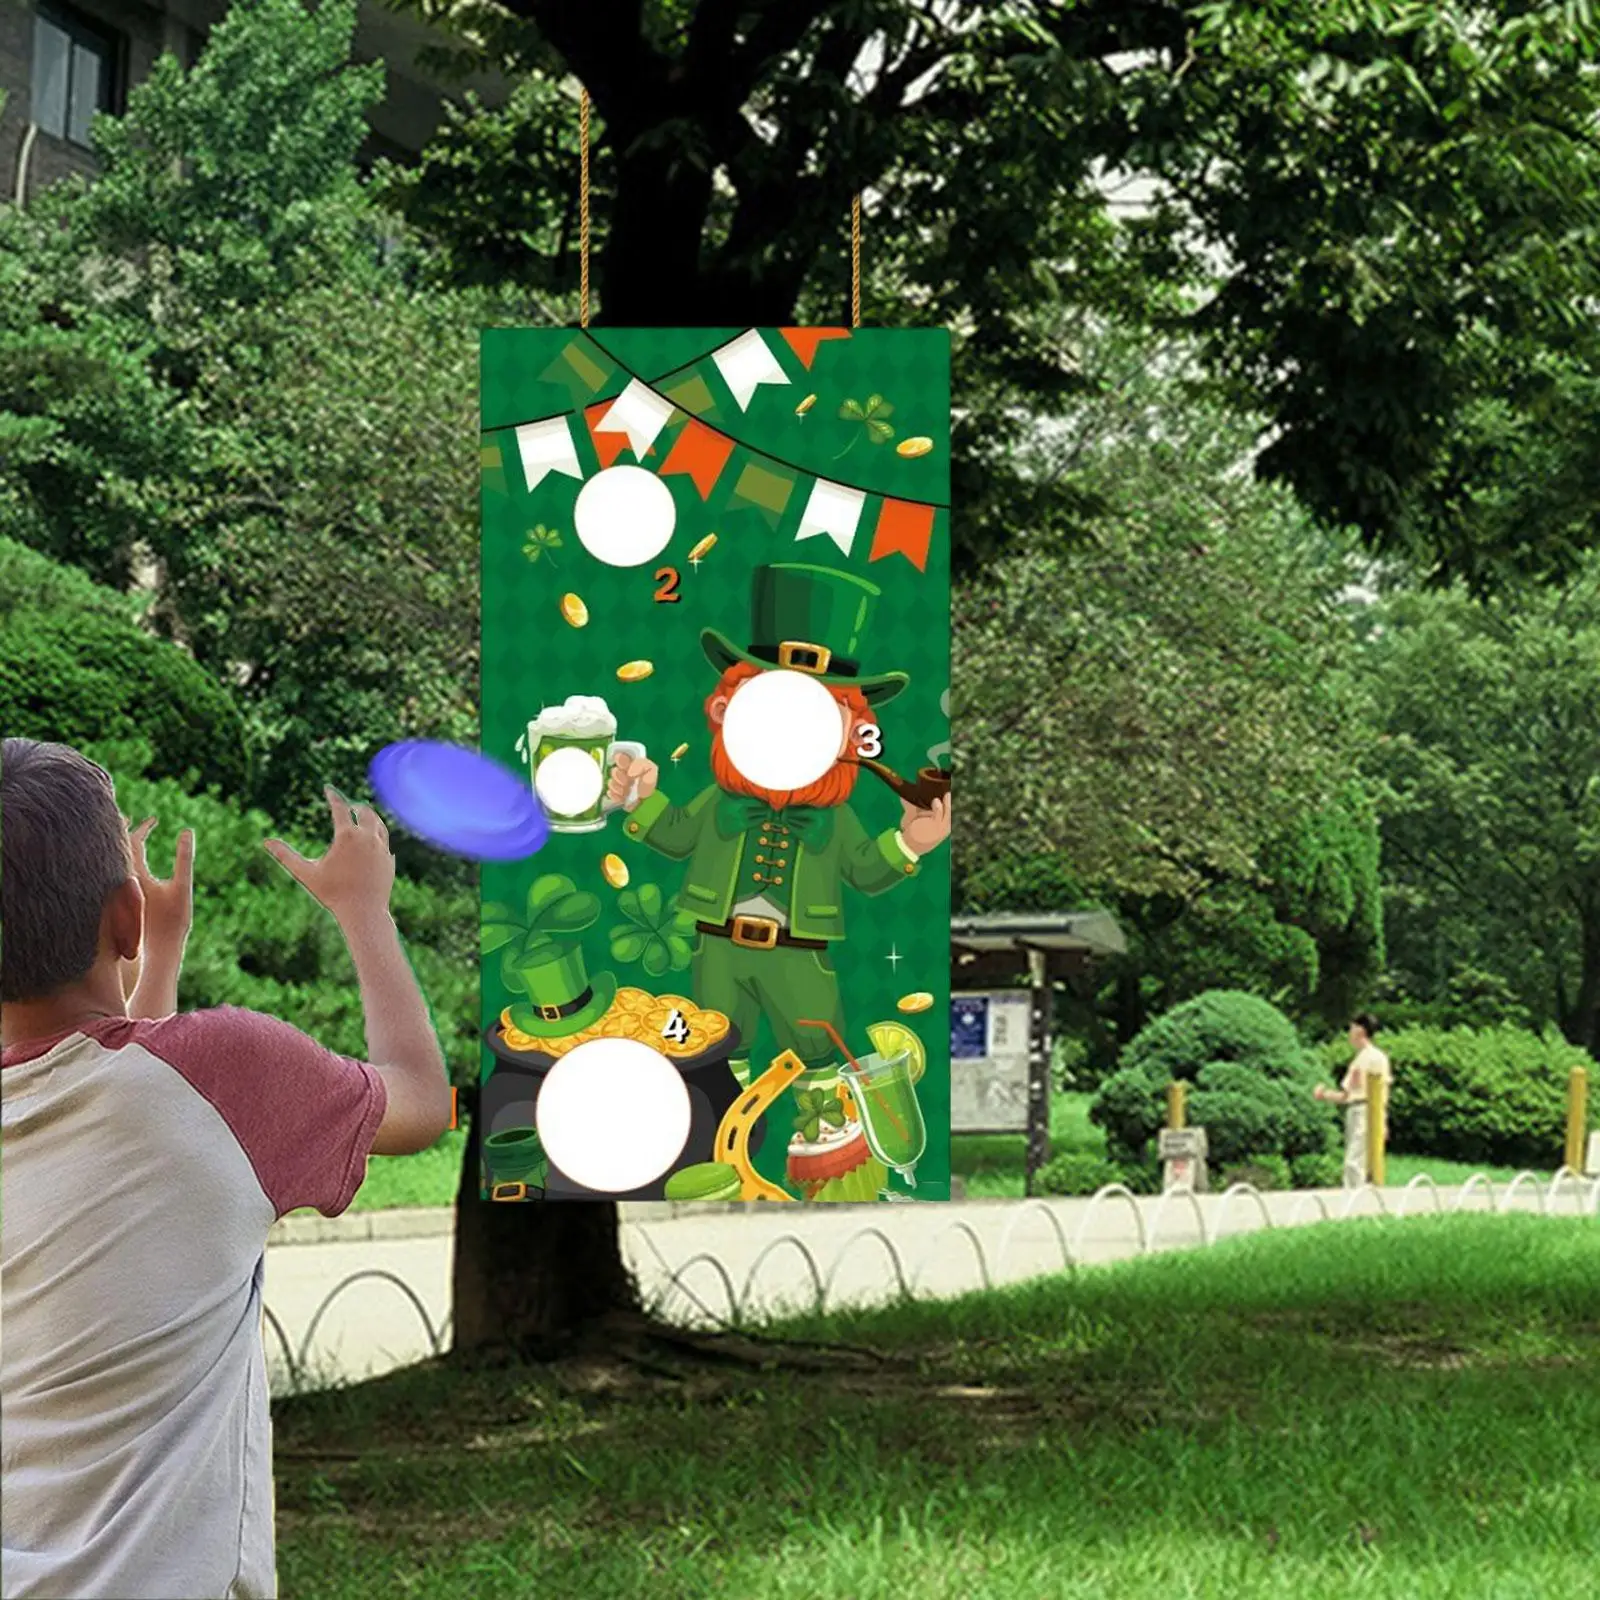 Toss Game Banner Party Game Favors with 3 Sandbag Decoration Reusable Background for Backyard Parties Kids Adults Garden